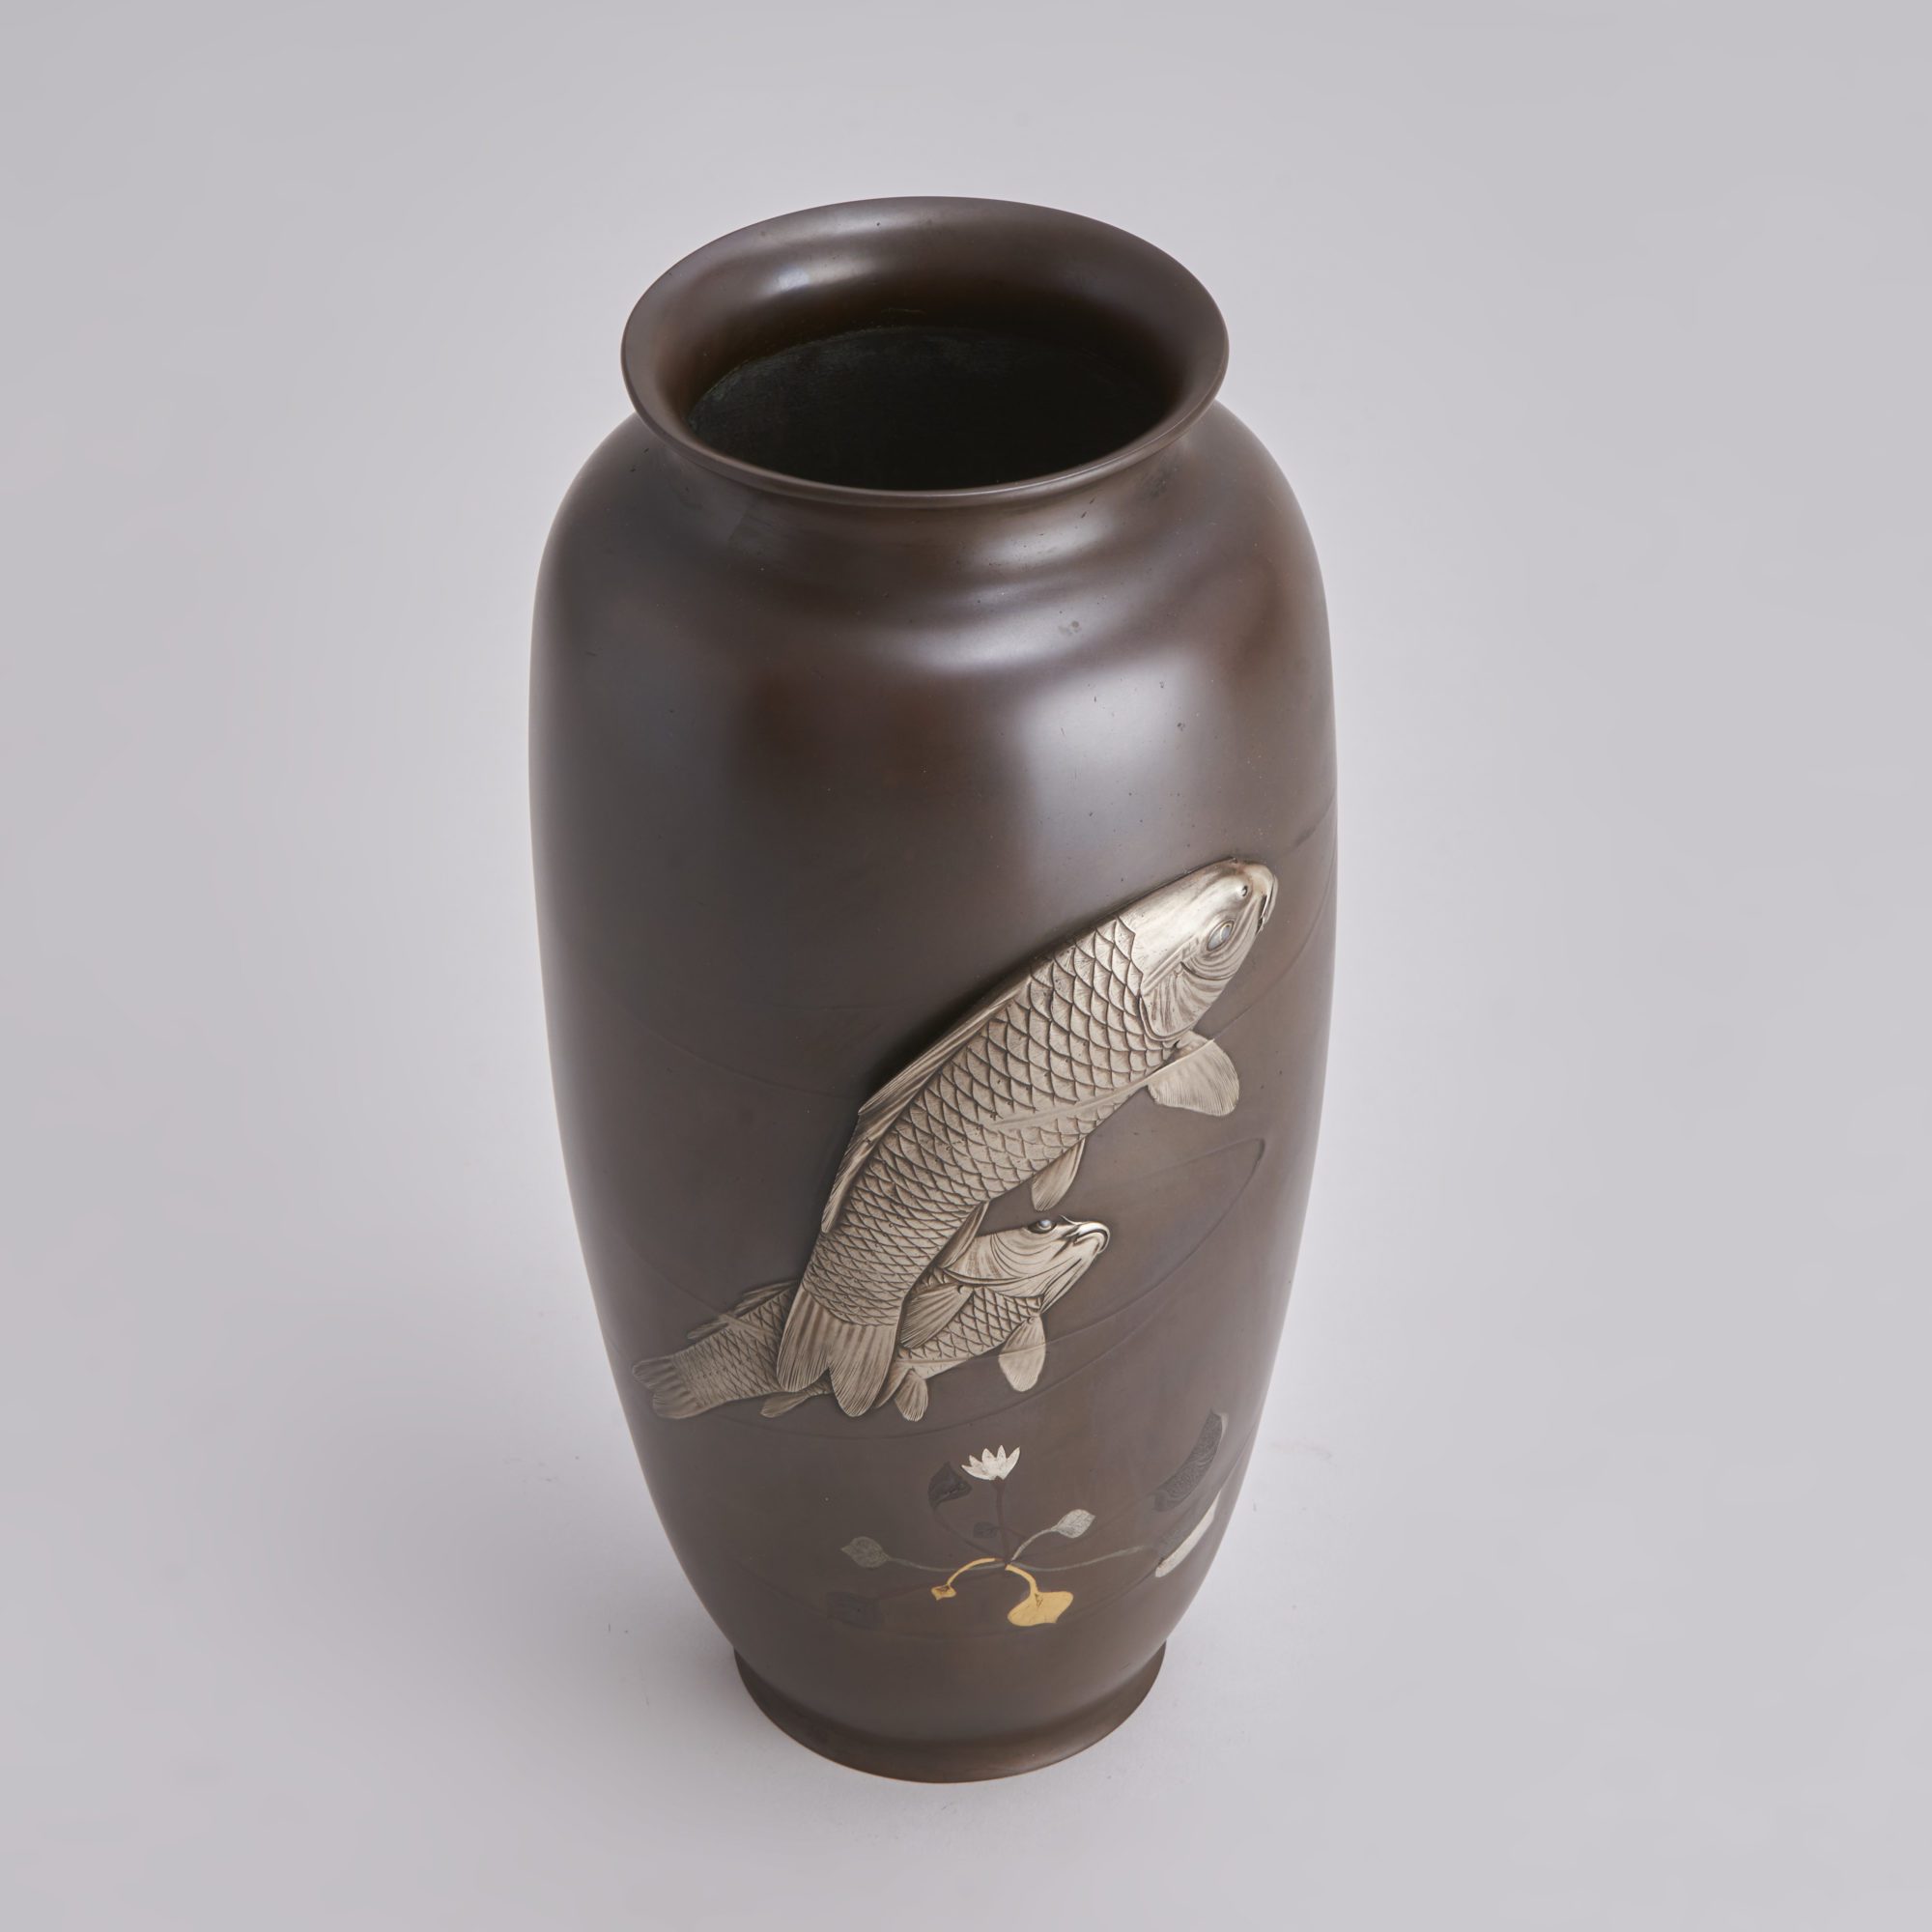 An attractive Bronze vase with Silver Carp decoration (Japanese, late 19th Century) from Kevin Page